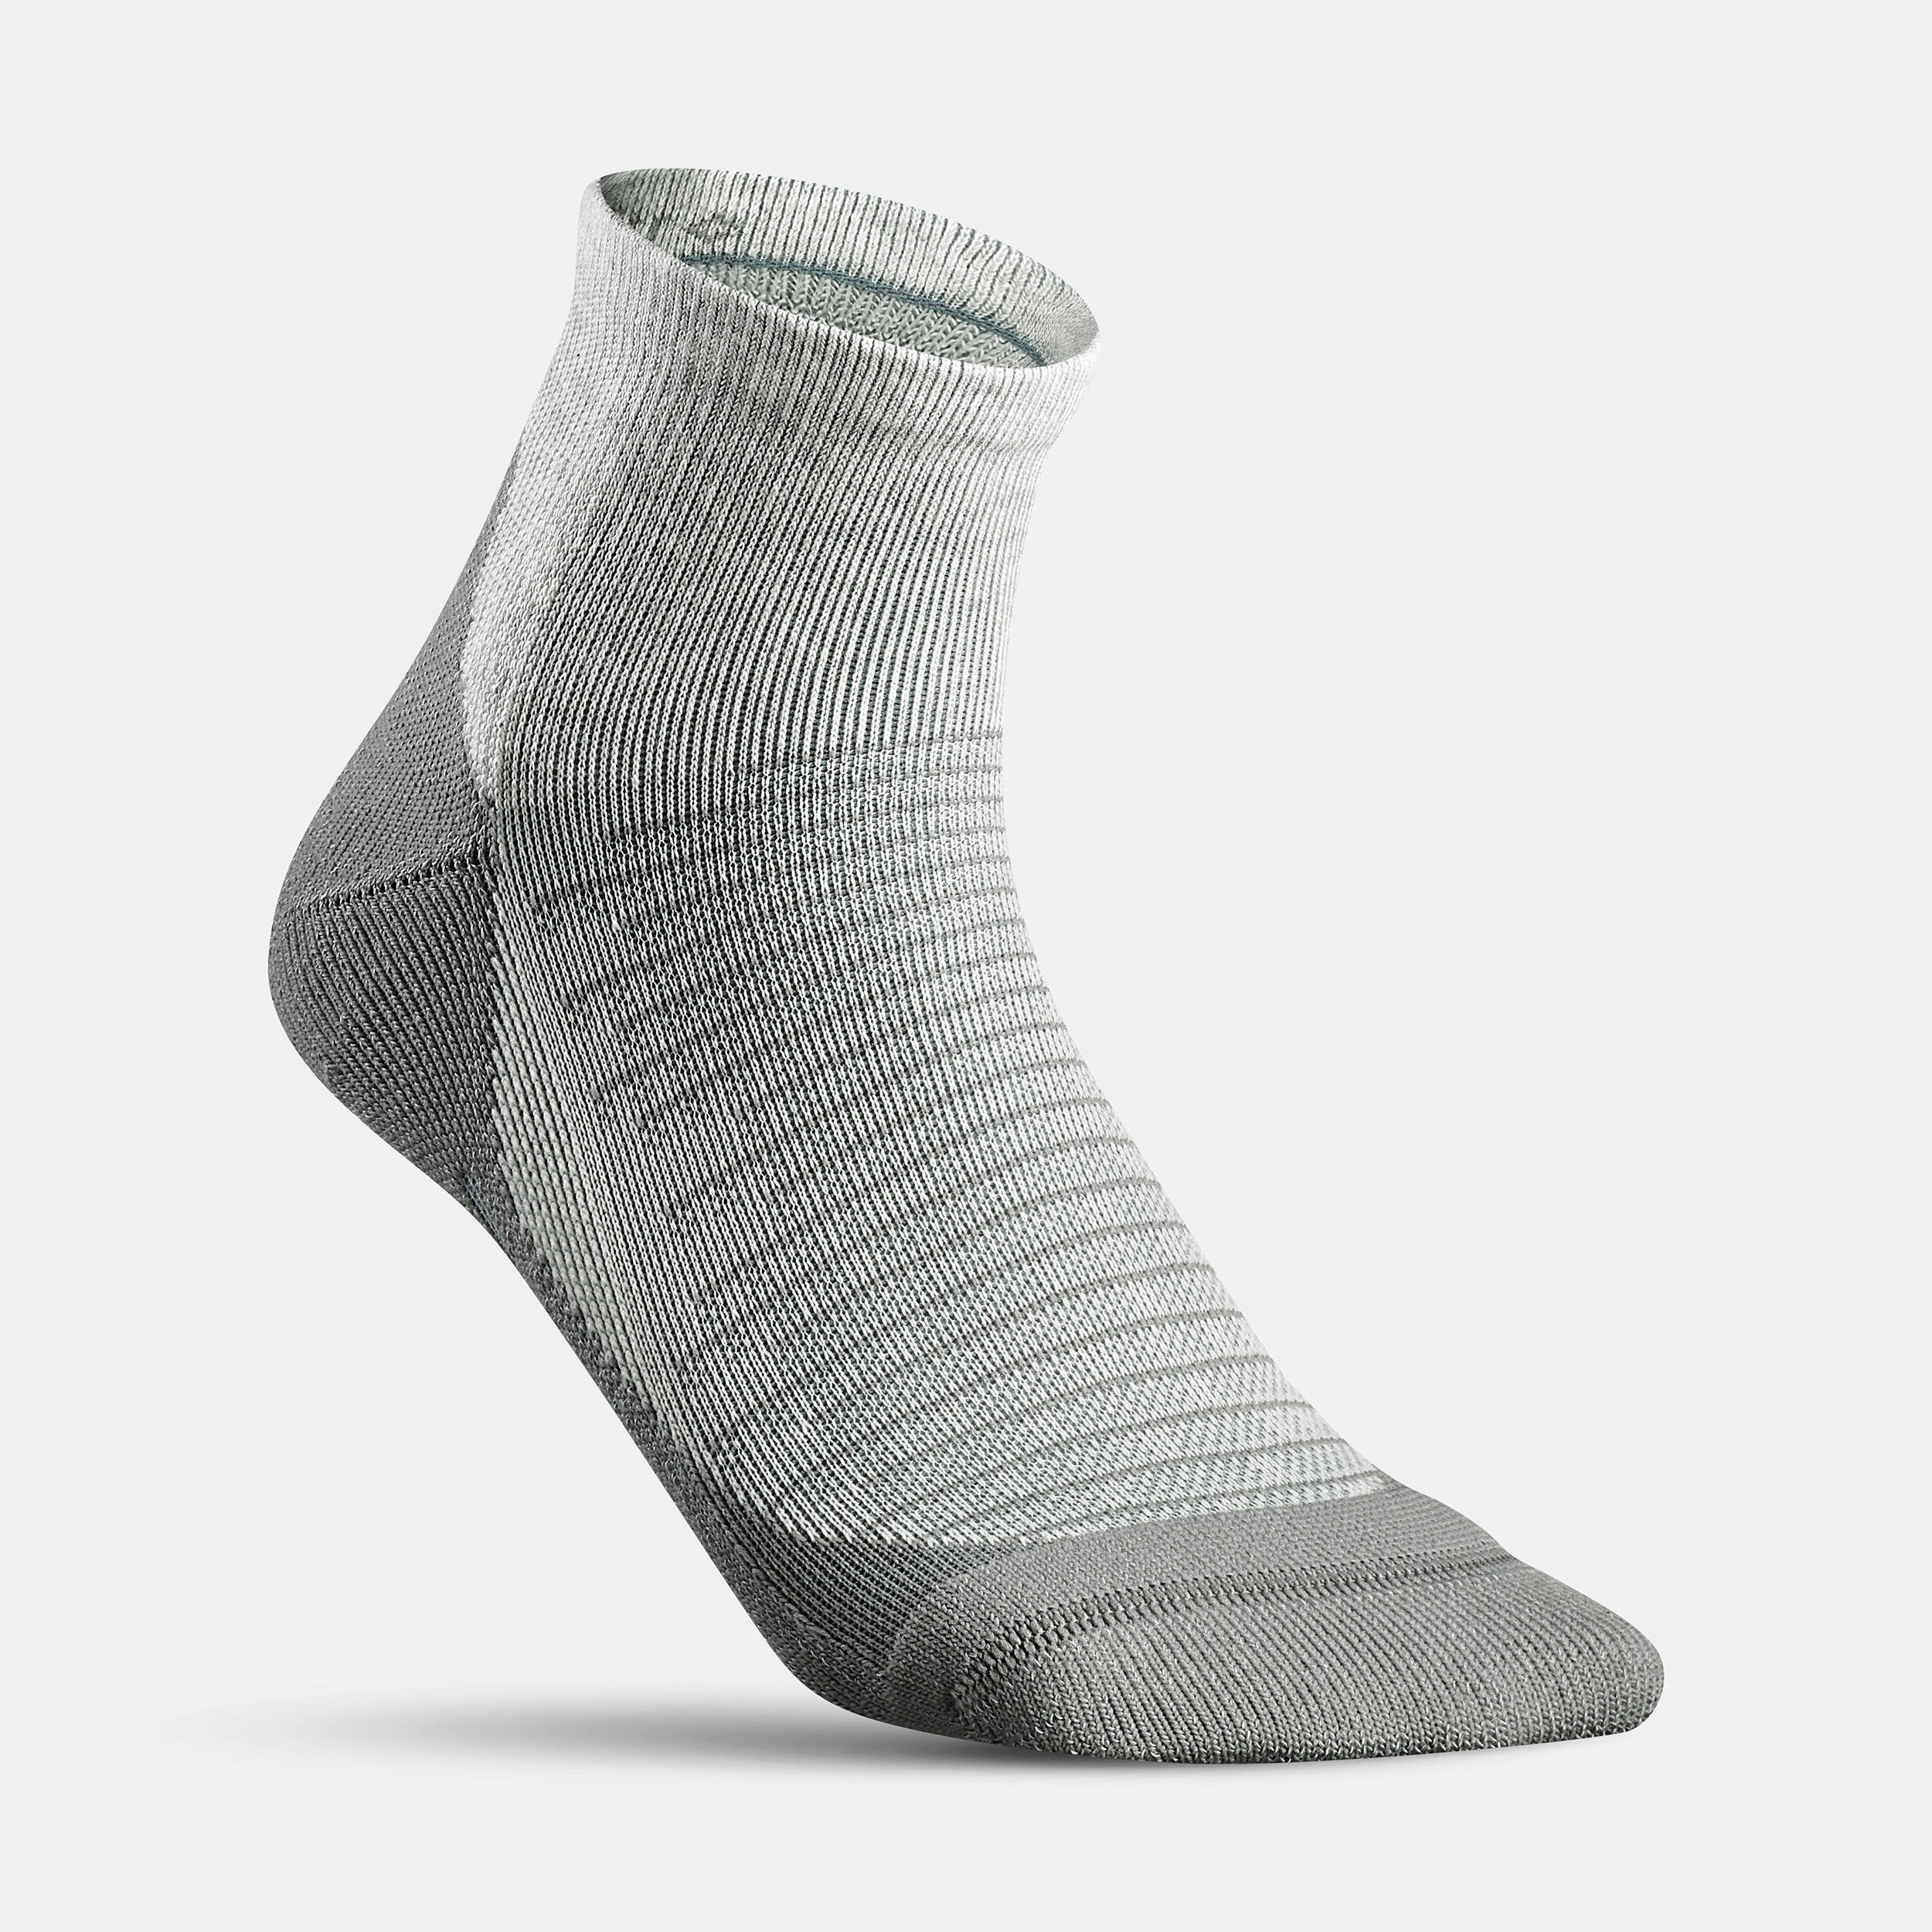 Hike 100 Mid Socks - Pink and Grey- Pack of 2 4/9